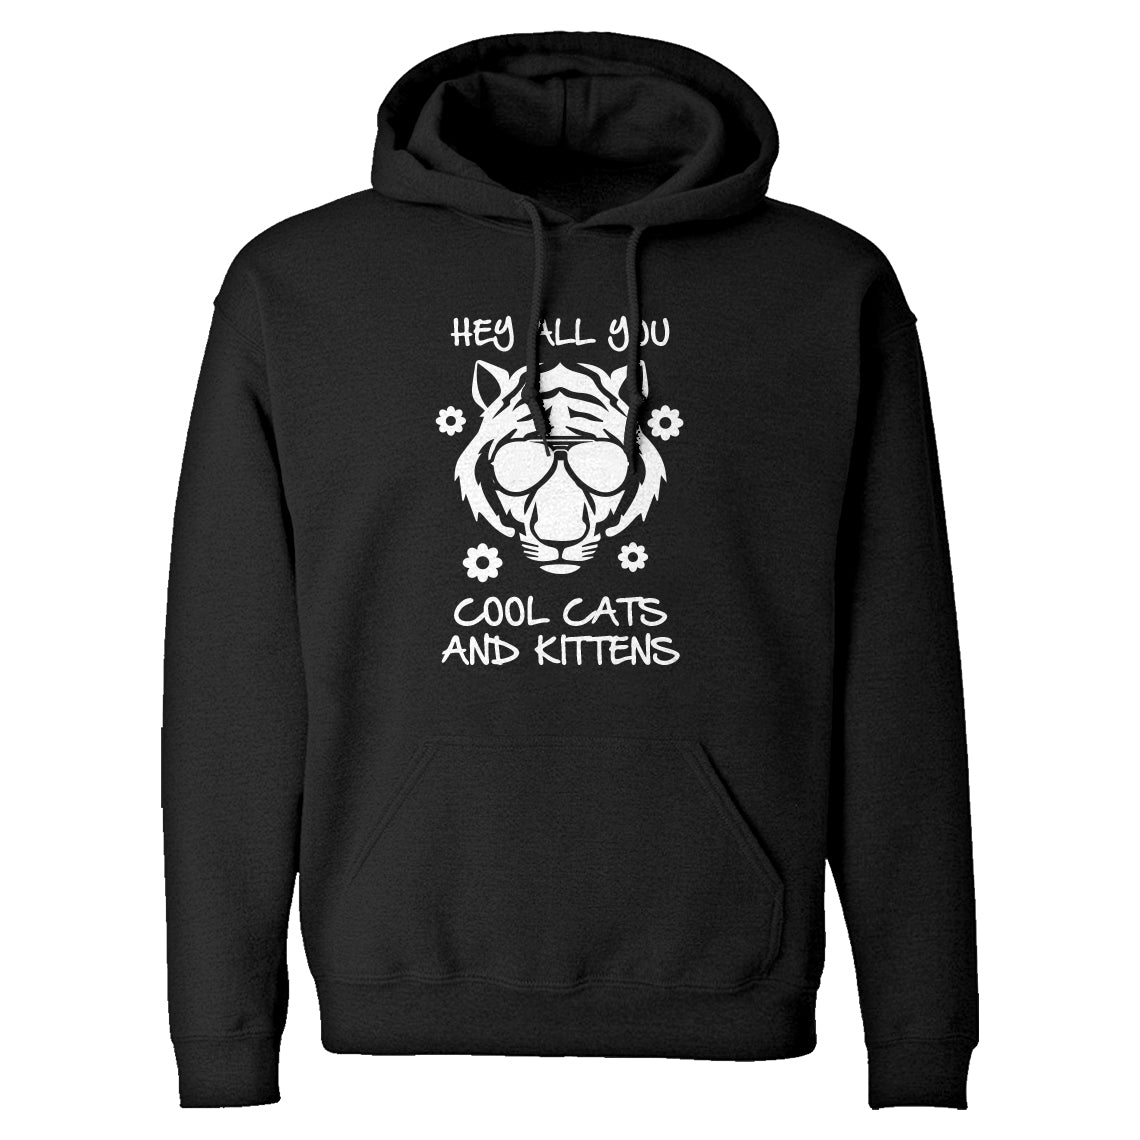 Hey all you Cool Cats and Kittens Unisex Adult Hoodie